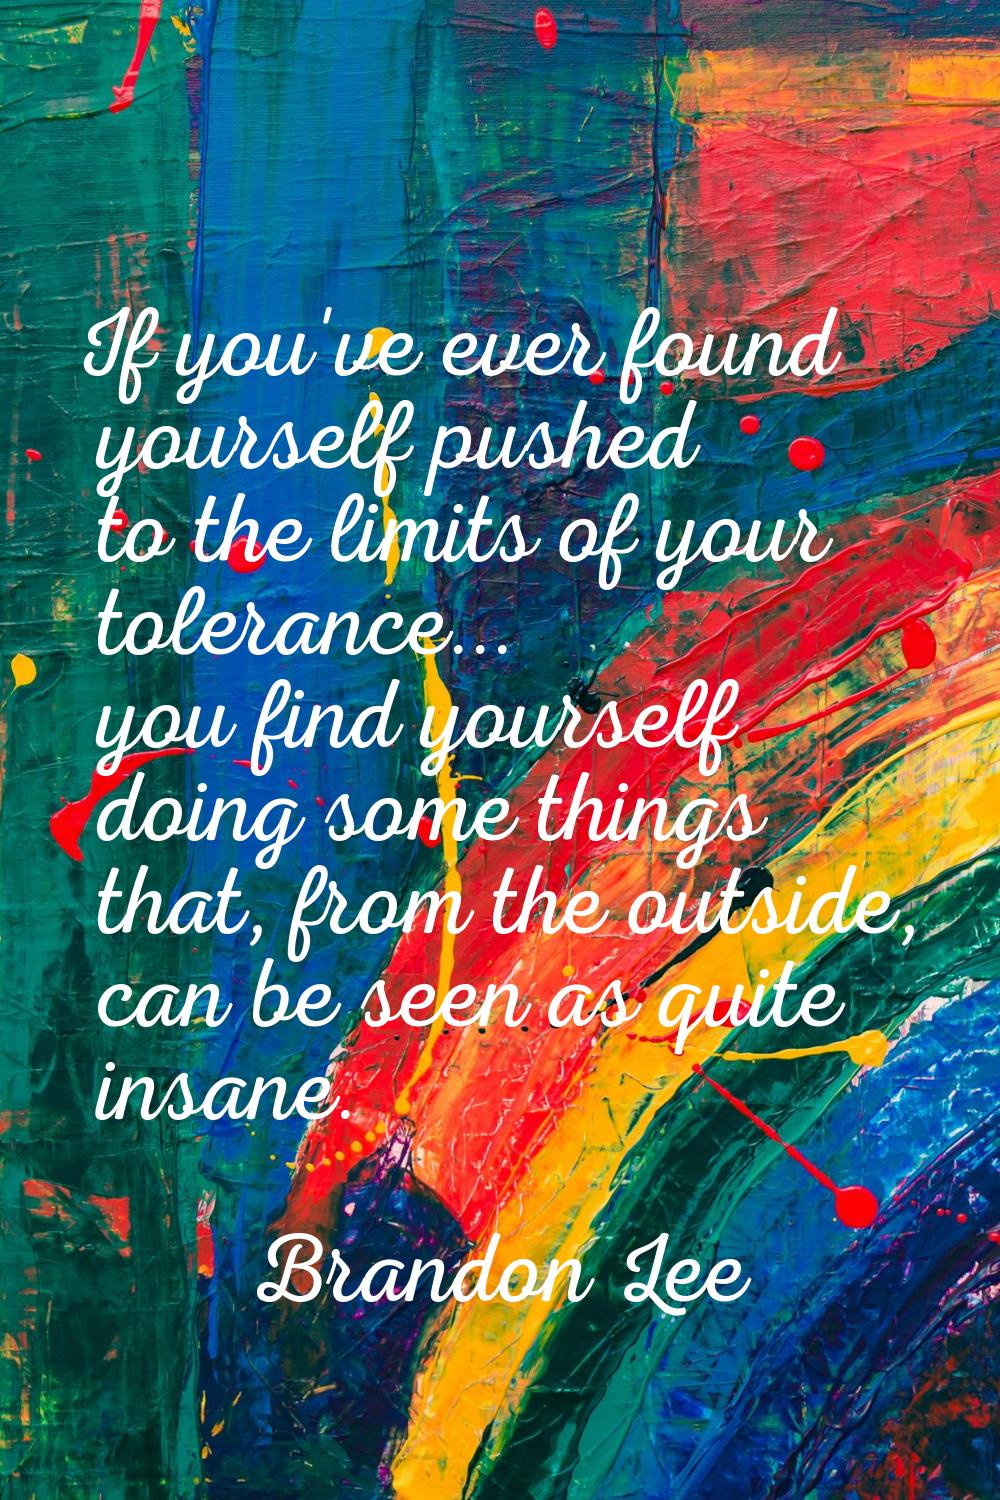 If you've ever found yourself pushed to the limits of your tolerance... you find yourself doing som